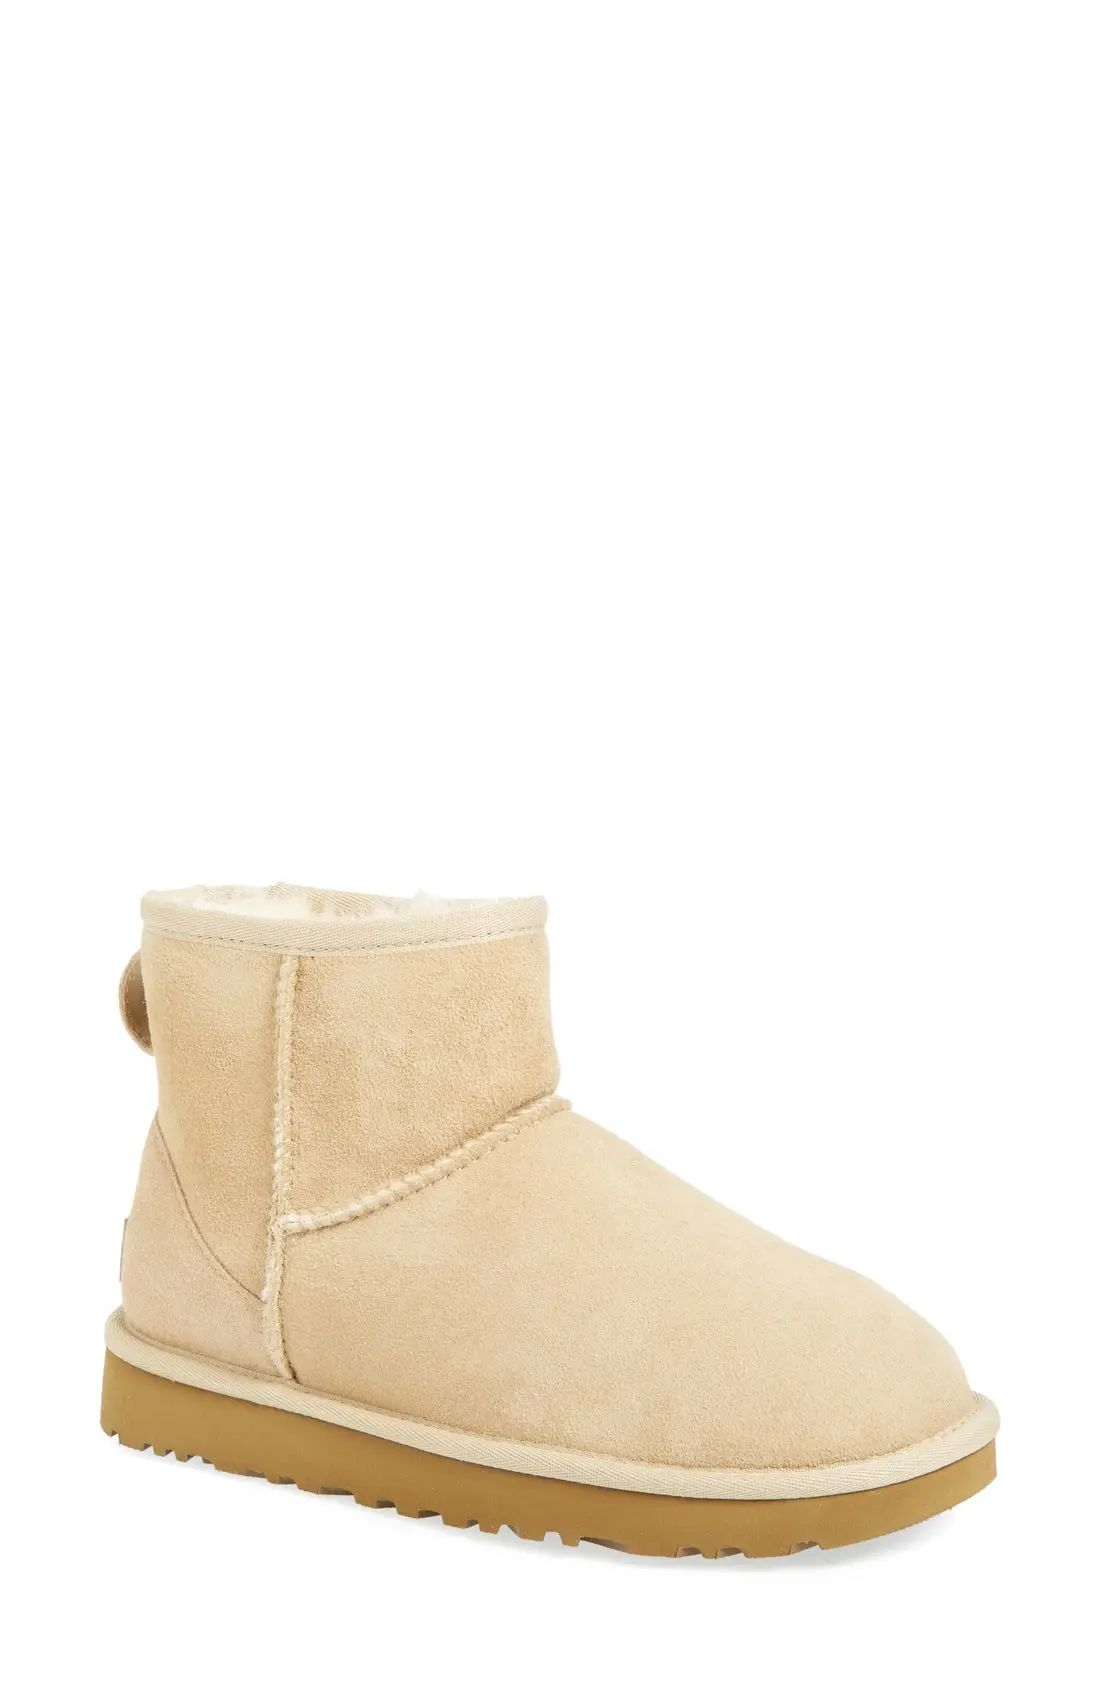 'Classic Mini II' Genuine Shearling Lined Boot | Nordstrom